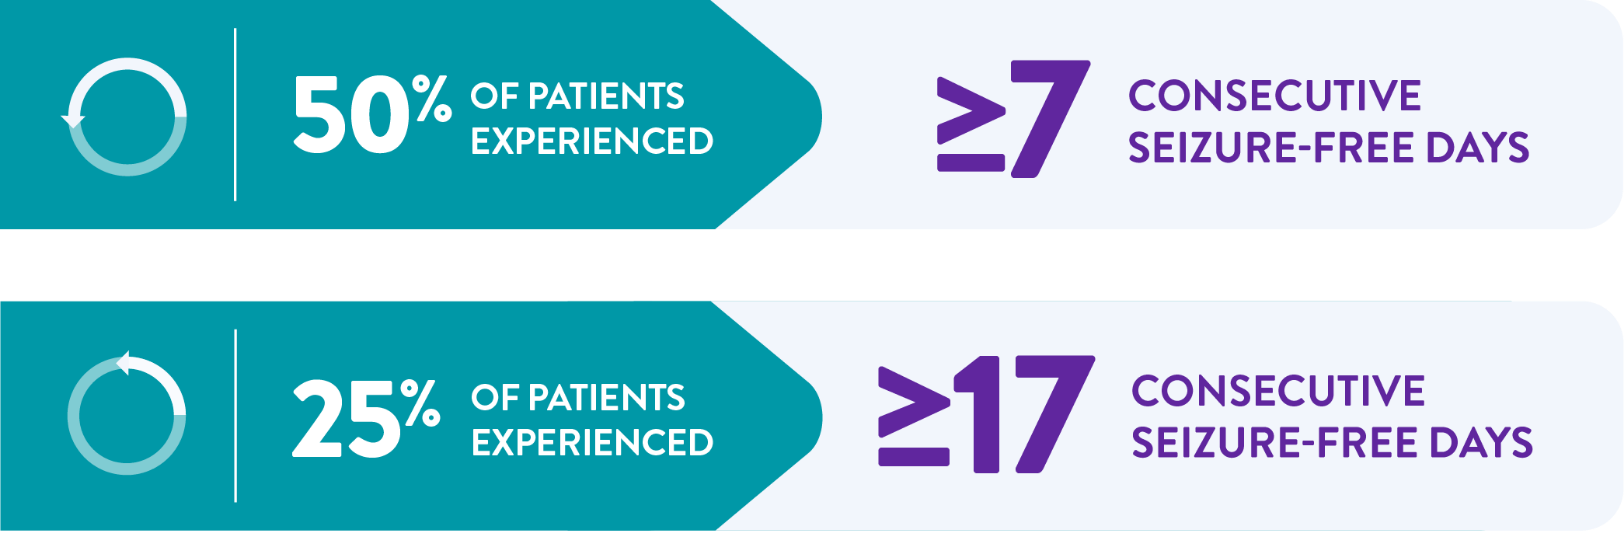 Figures showing 50% of patients with Lennox-Gastaut syndrome experienced at least 7 consecutive seizure-free days while 25% experienced at least 17 consecutive seizure-free days.